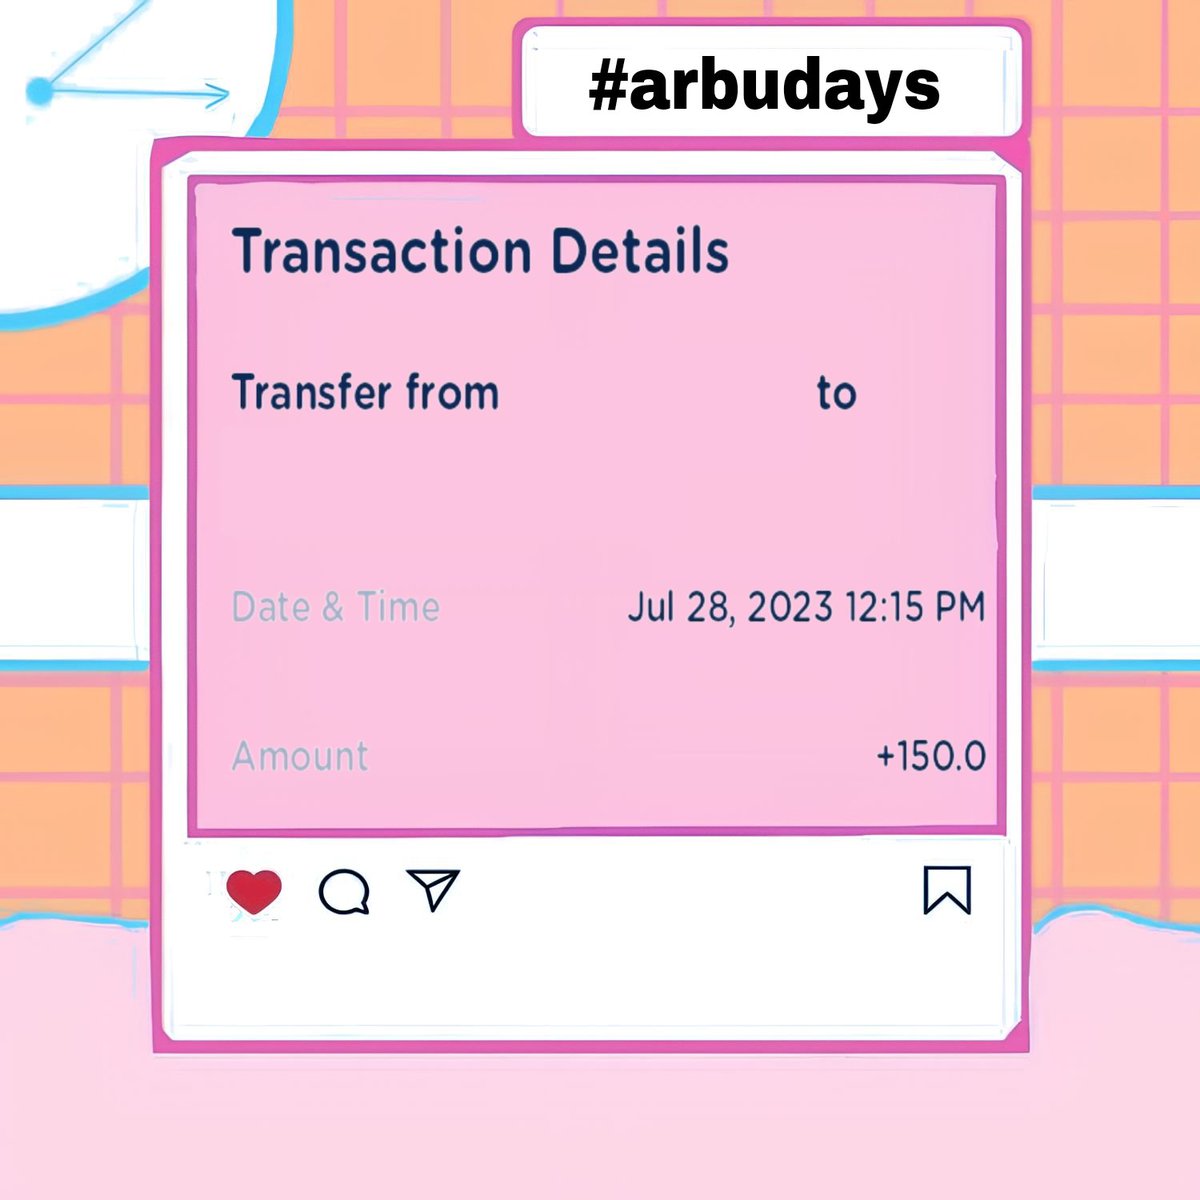 ✨ #phiawins ✨ 🍀 #arbudays 🍀 Prize received! My first time using #arbudays win vouch! Thank you to the sponsor and @chibudangproms! And also thanks to @claimingchi.